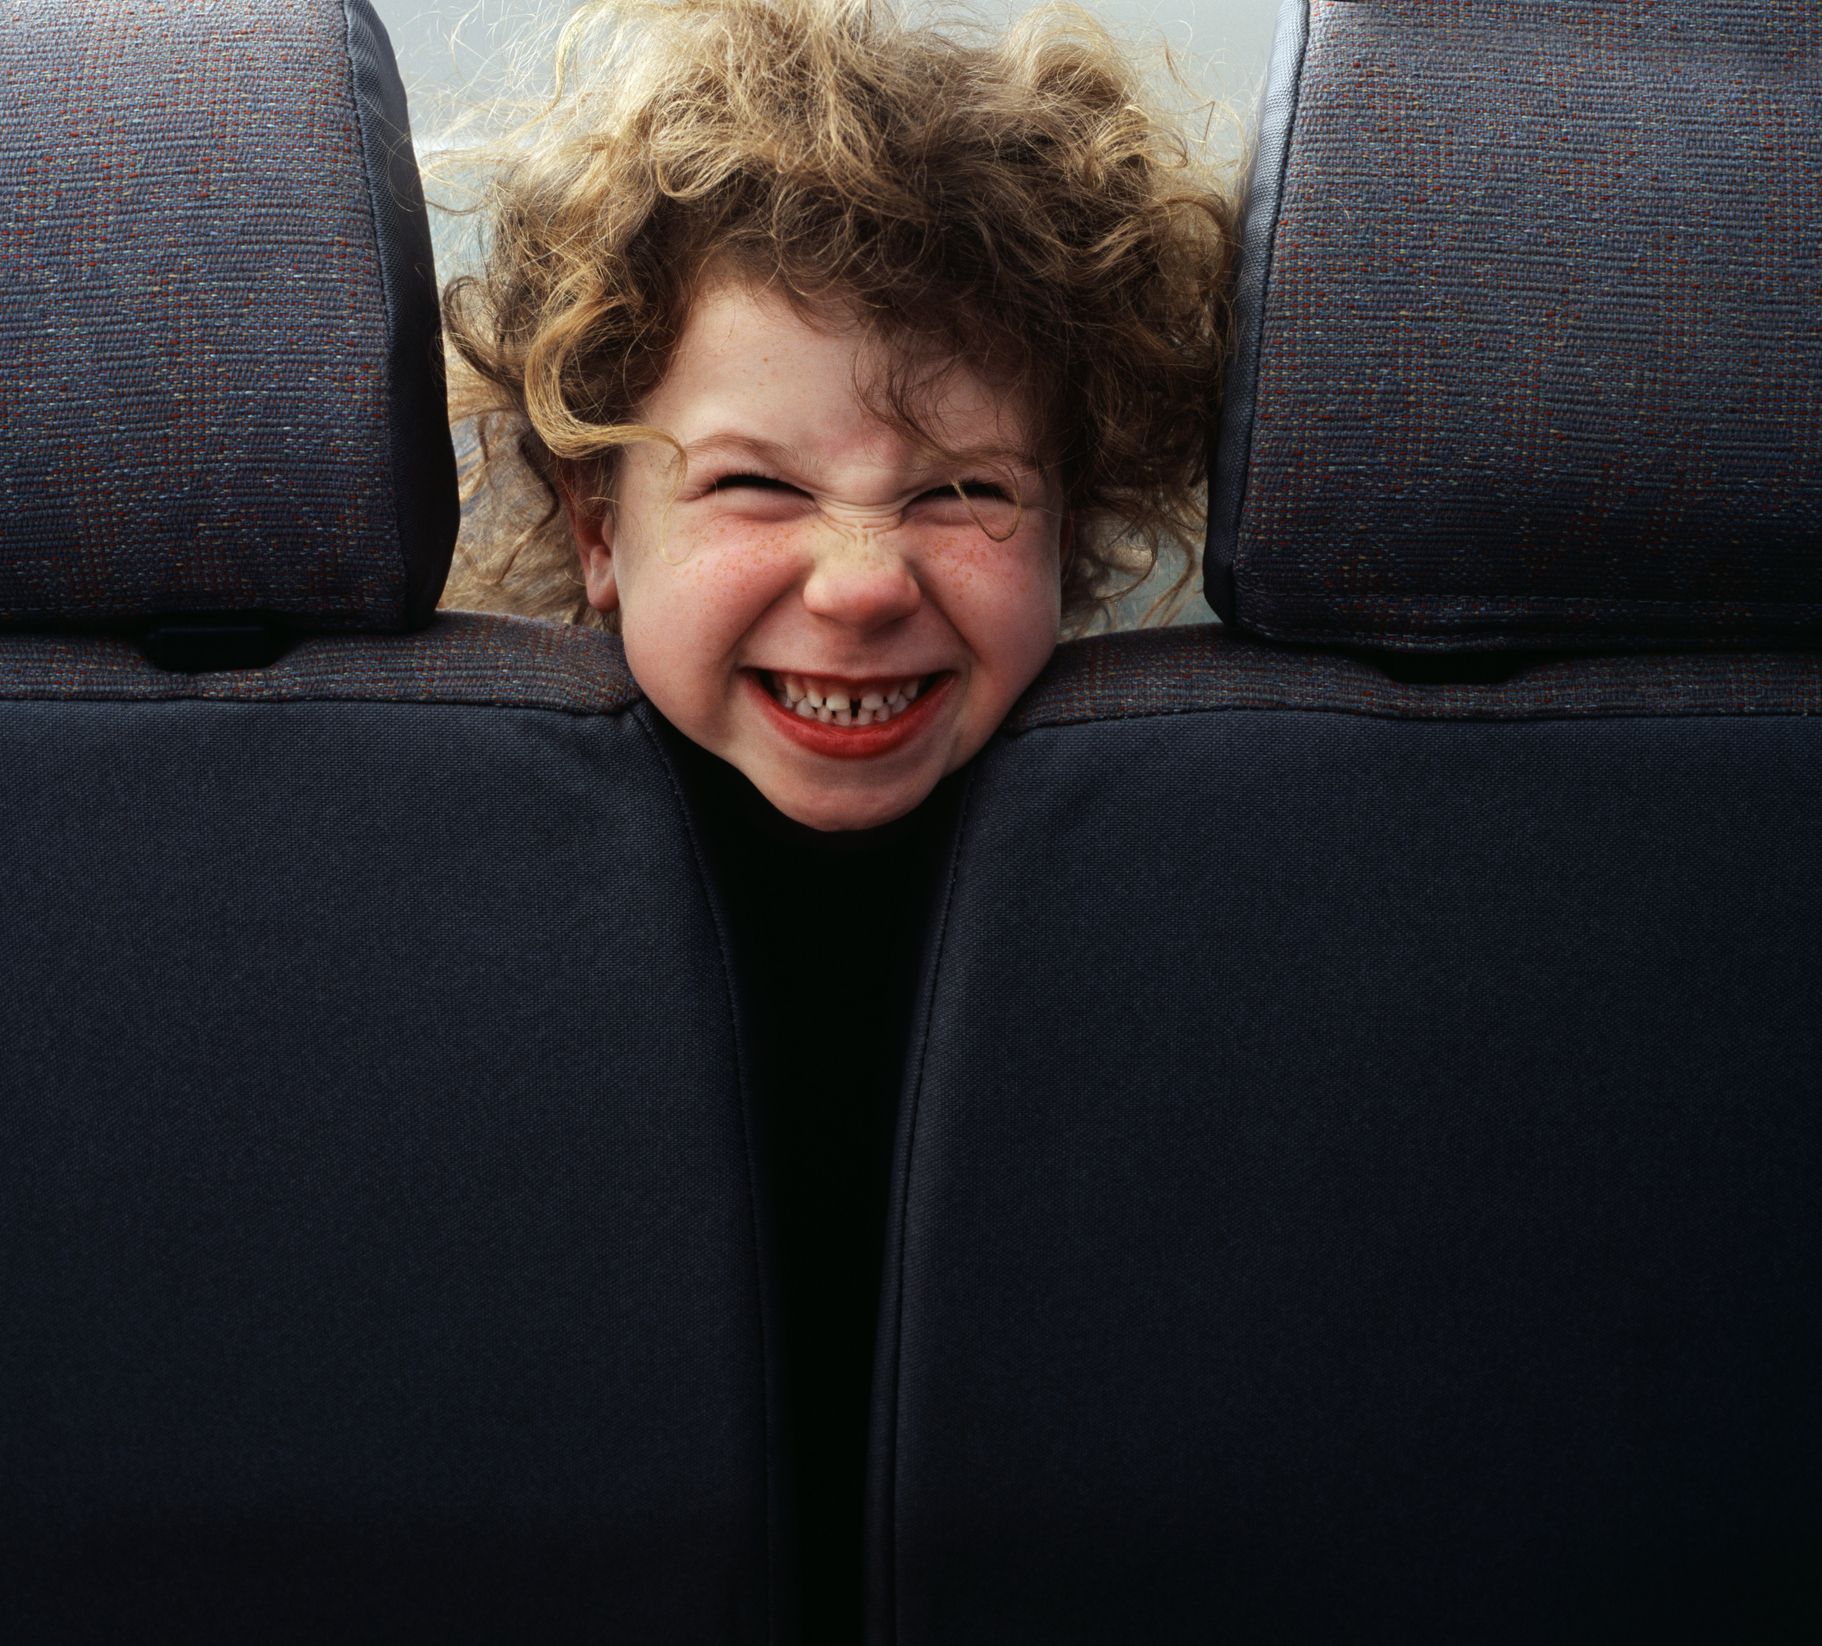 Child being annoying on public transit or airplane